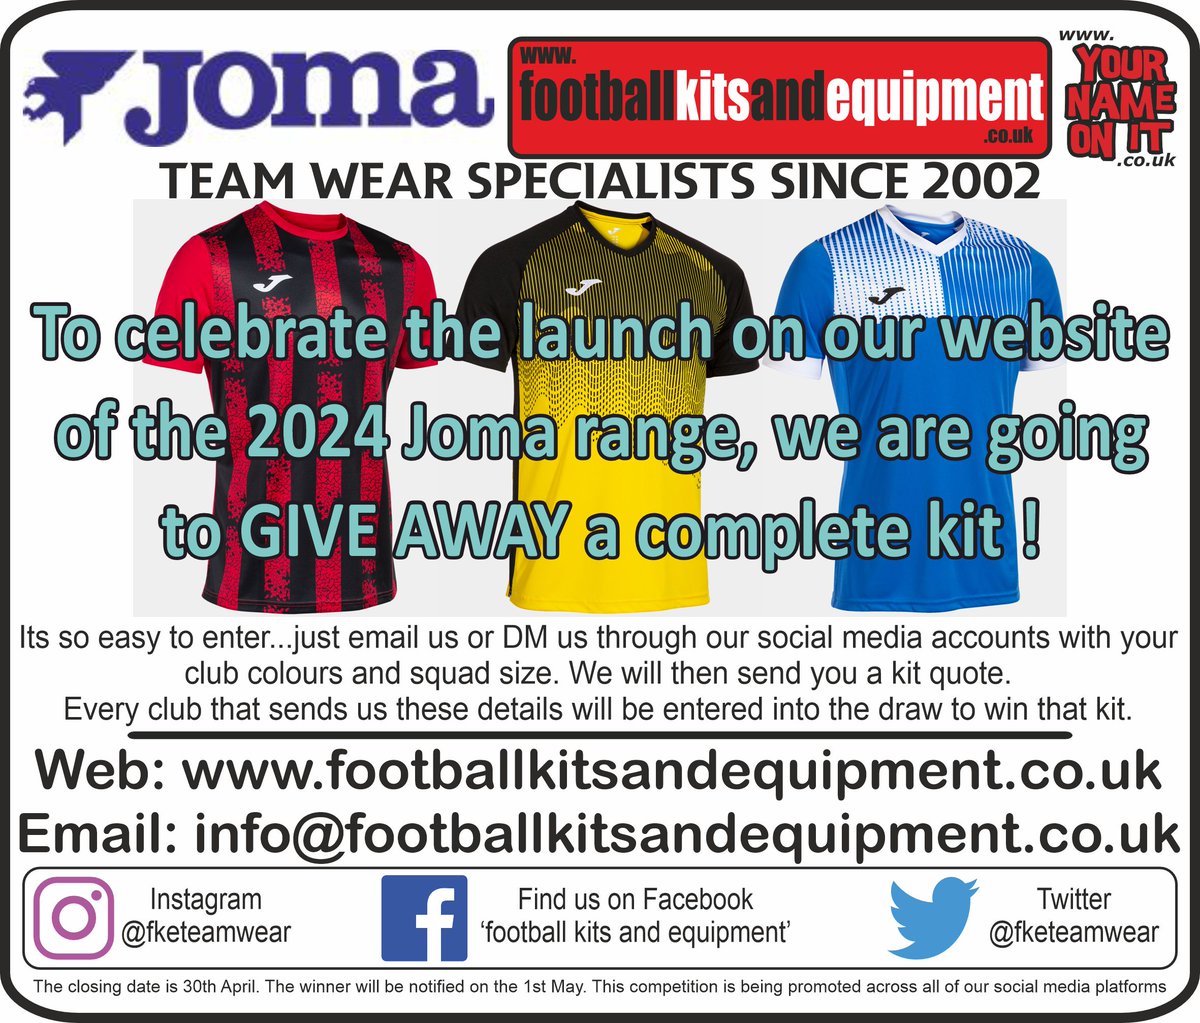 Our friends at @fketeamwear are running a competition for one lucky team to receive a brand new Joma football kit for the new season! Look at the poster here for further details and how to enter